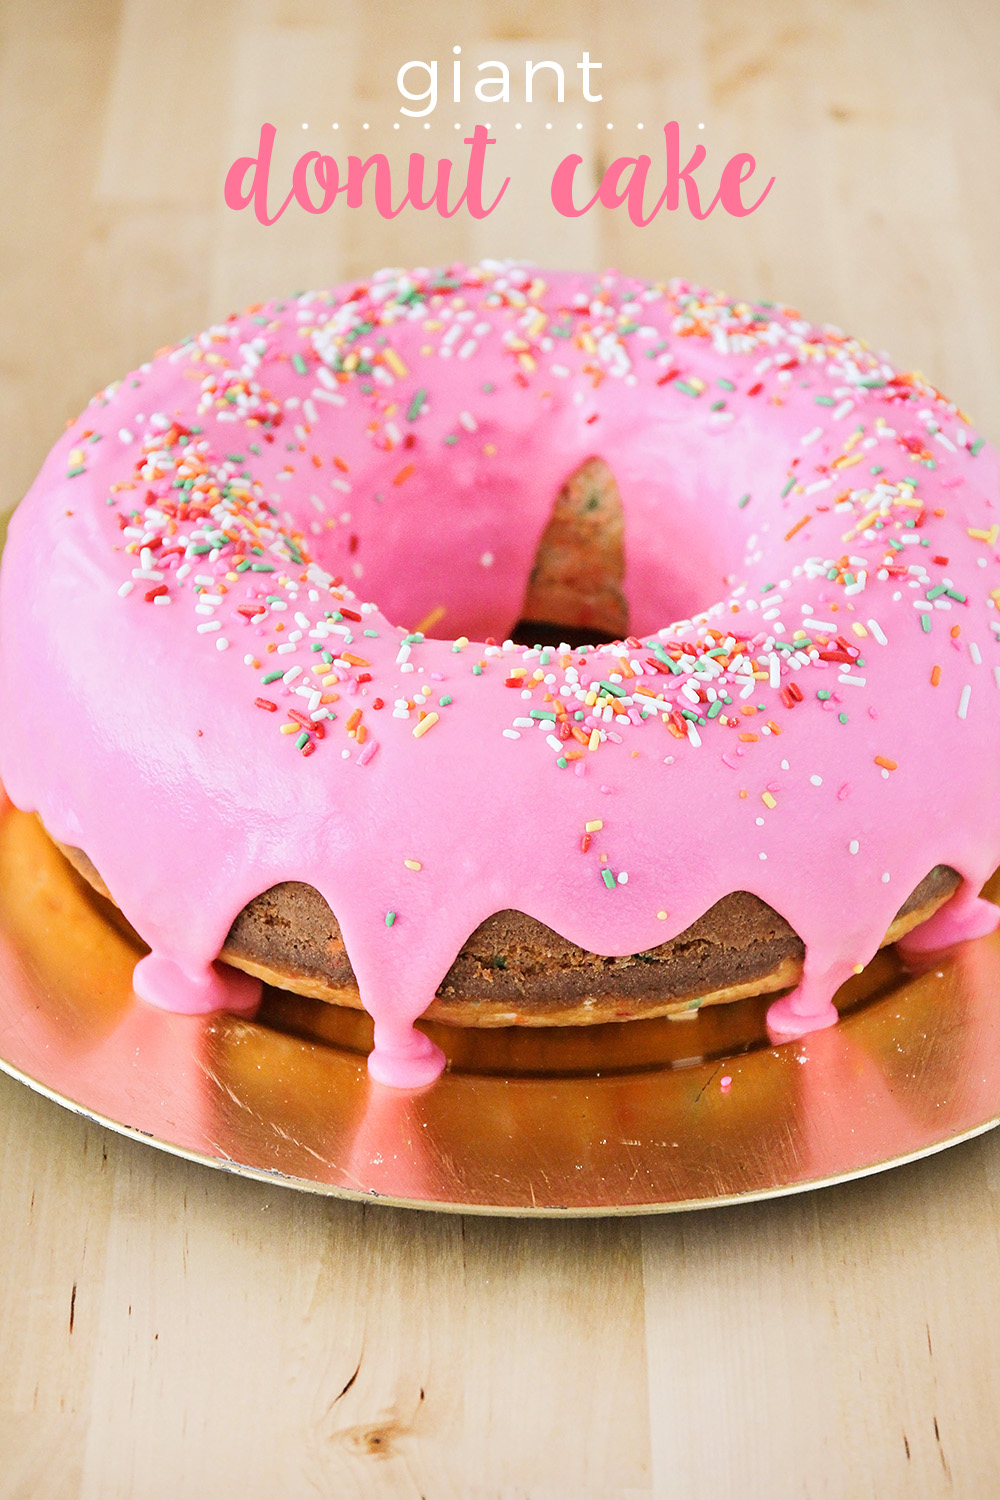 This giant donut cake is super easy to make, and so fun, too! Perfect for birthdays and special occasions!